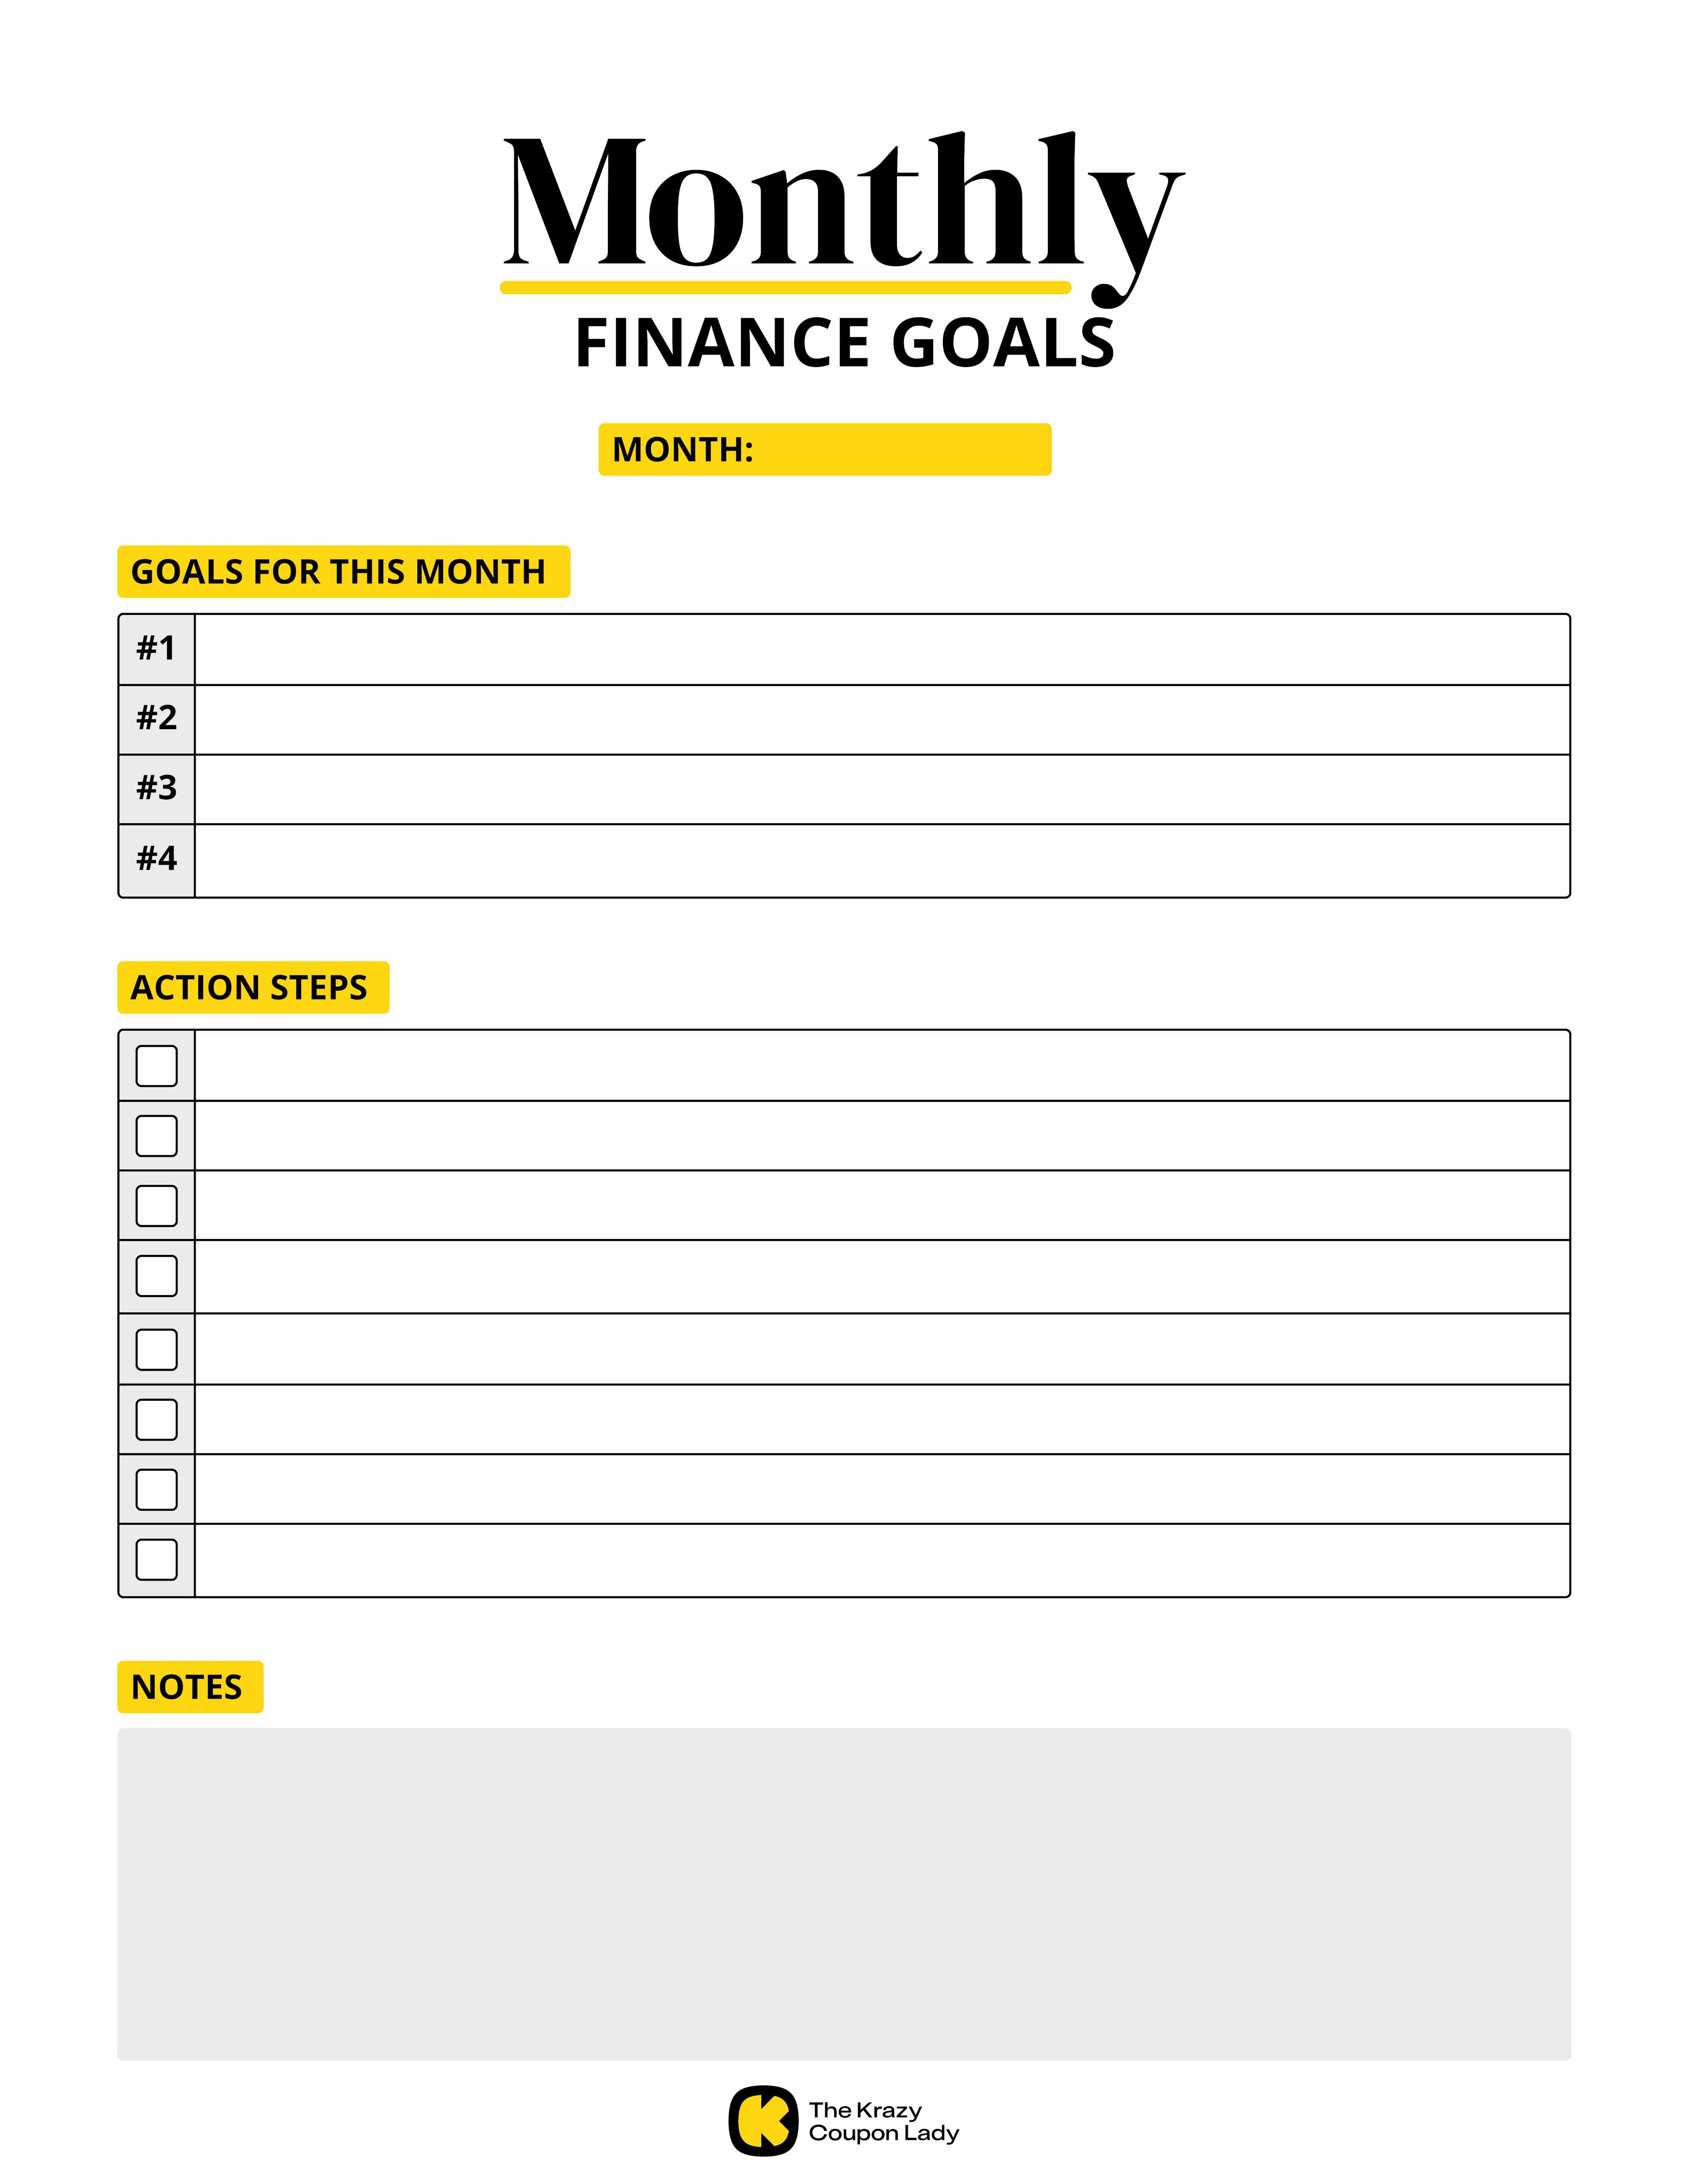 Monthly Finance Goals printable